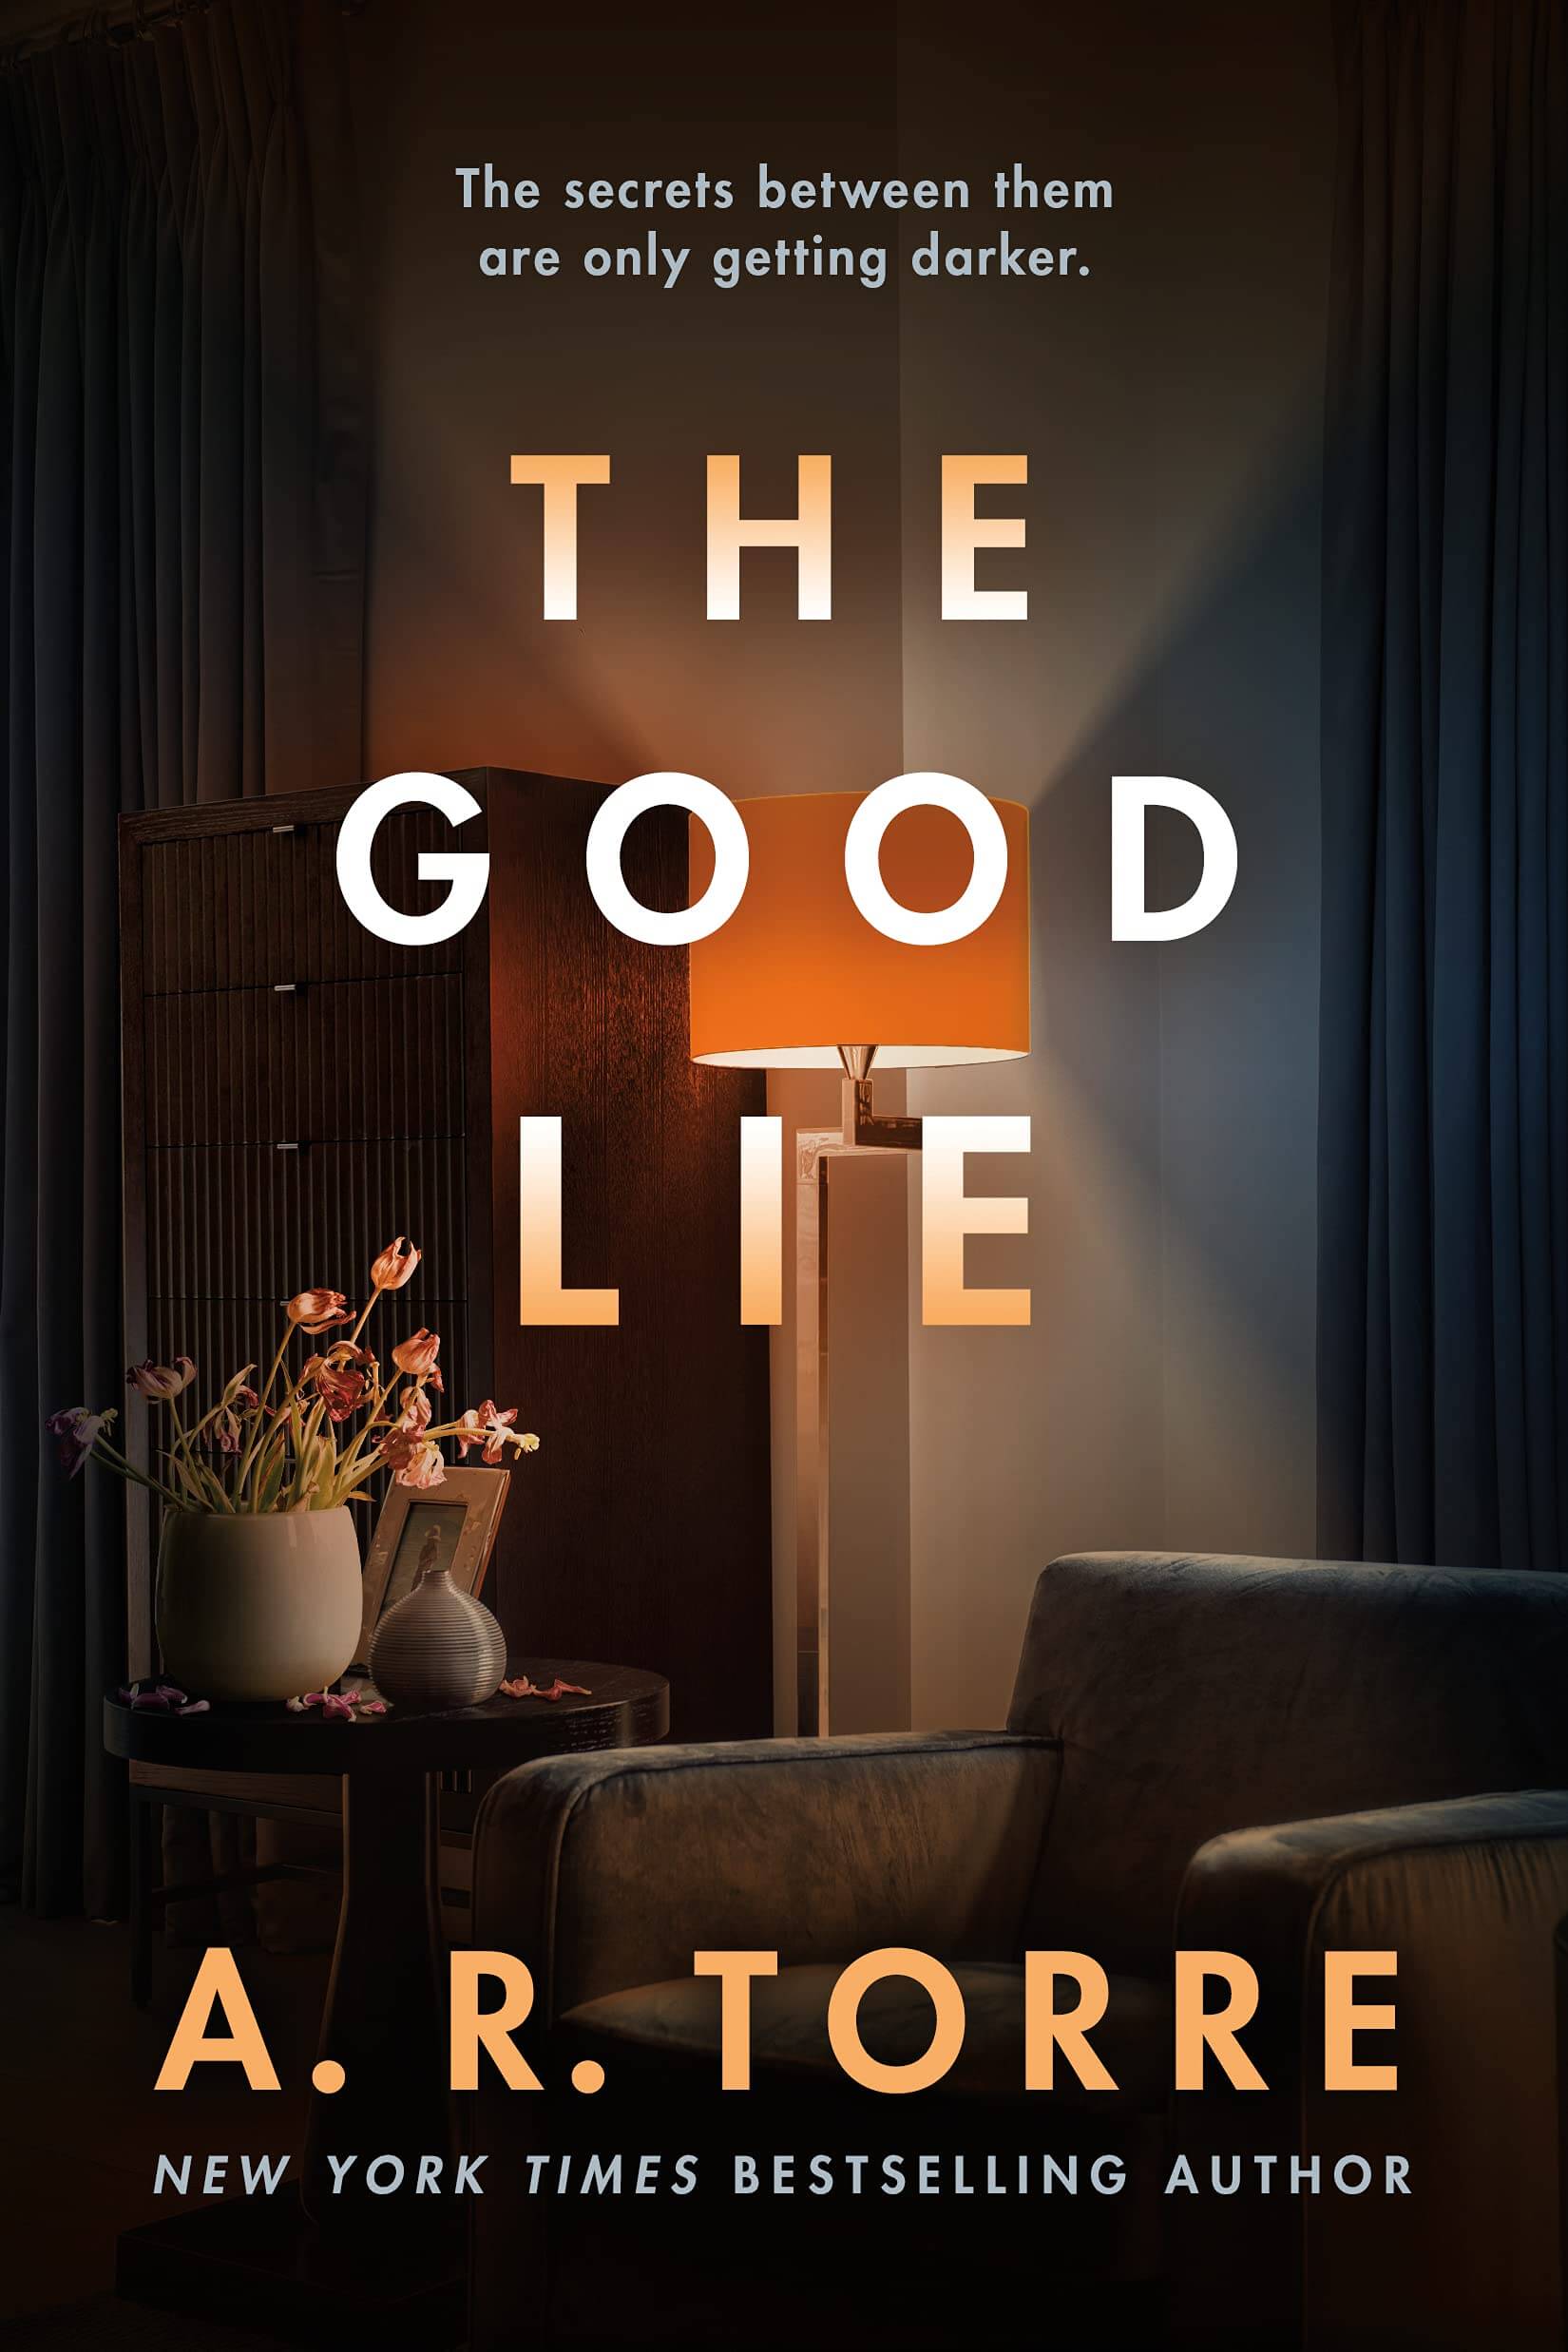 Cover of The Good Lie by A.R. Torre